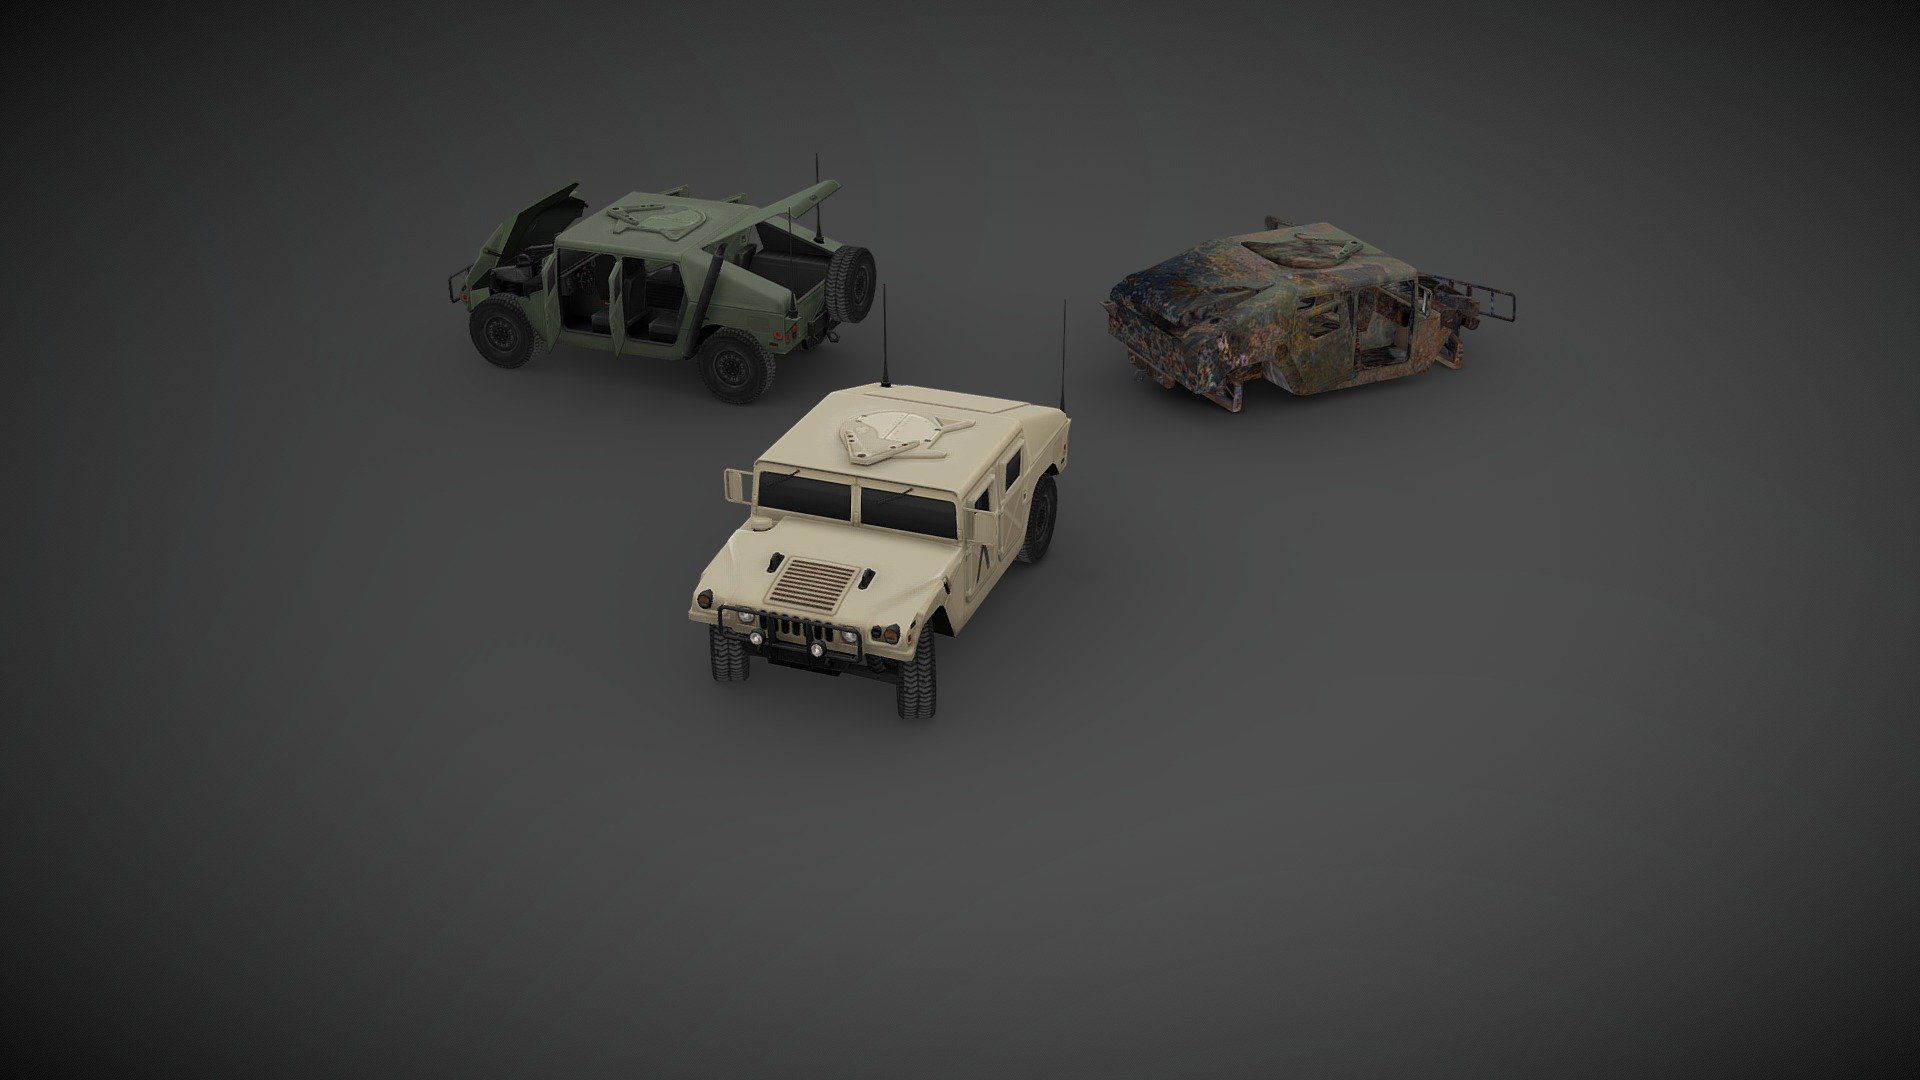 Showcase of the 1992 AM General M998 High Mobility Multipurpose Wheeled Vehicle, I’ve made for project ZOMBOID, low poly but with a high detail texture, optimized for game engine. This version is not a 100% true to the original since there are some compromises I’ve had to make to present it here.

You can find the actual version in project ZOMBOID STEAM Workshop 3d model